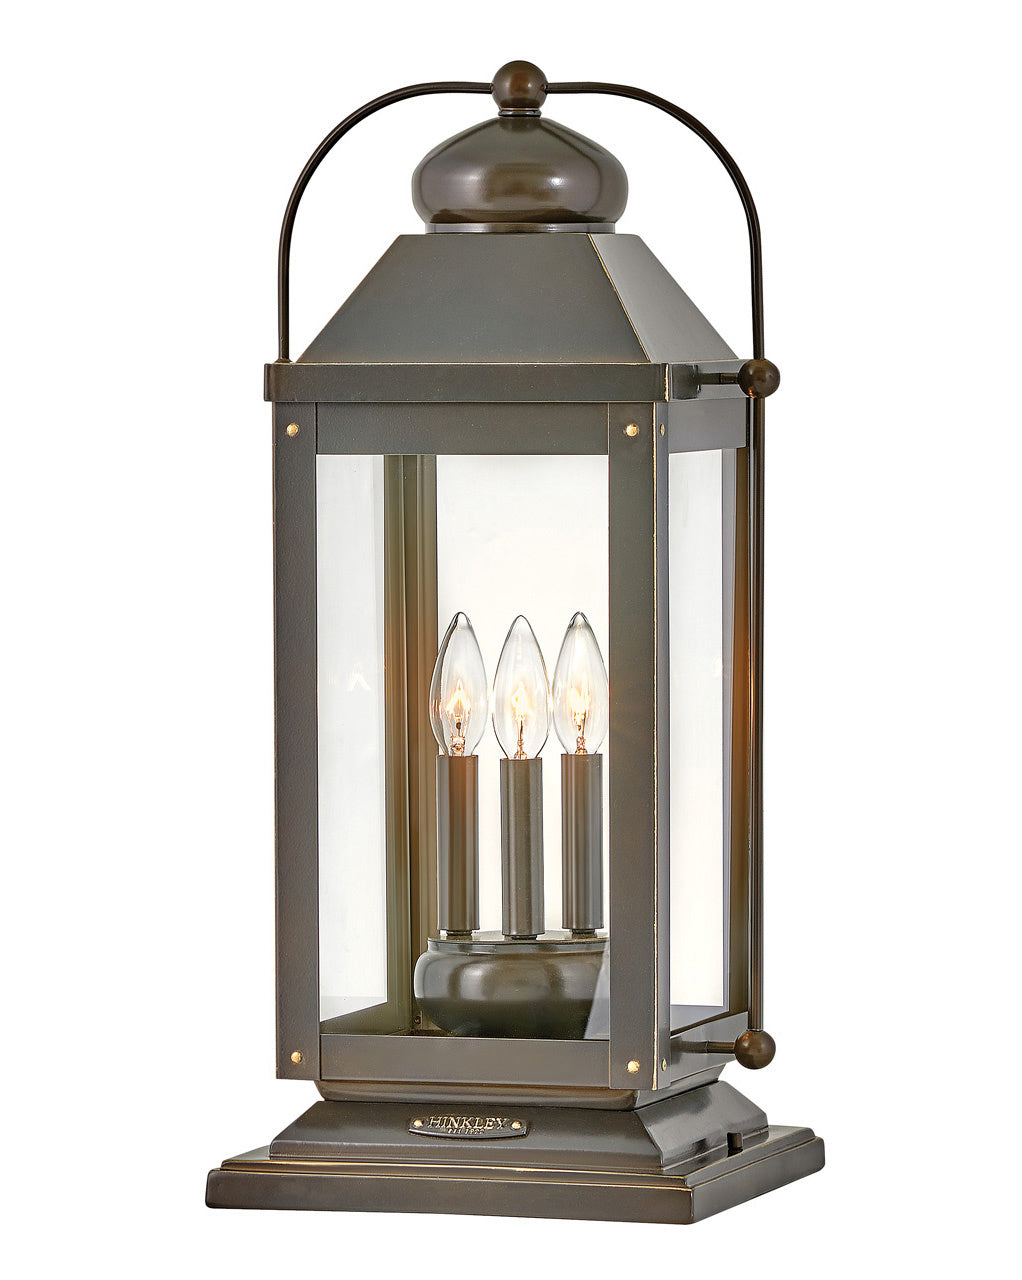 Hinkley - 1857LZ-LL - LED Outdoor Lantern - Anchorage - Light Oiled Bronze